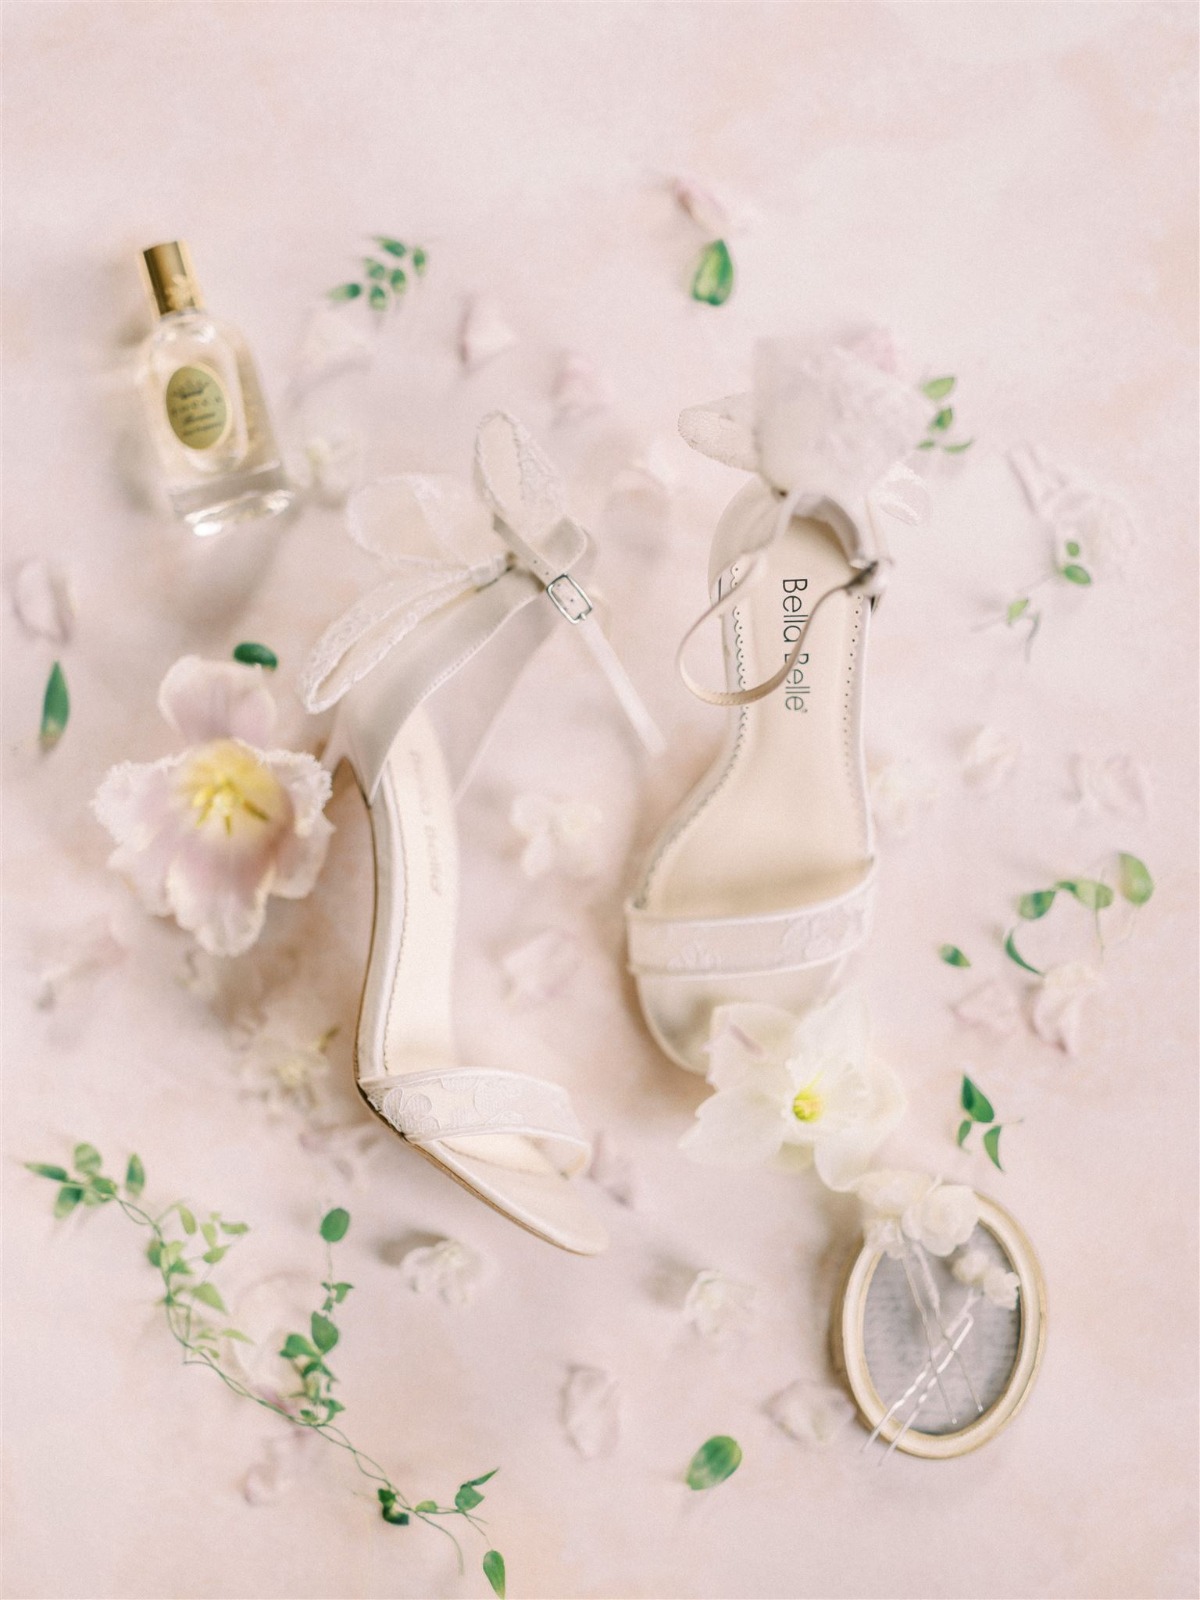 white shoes for bride